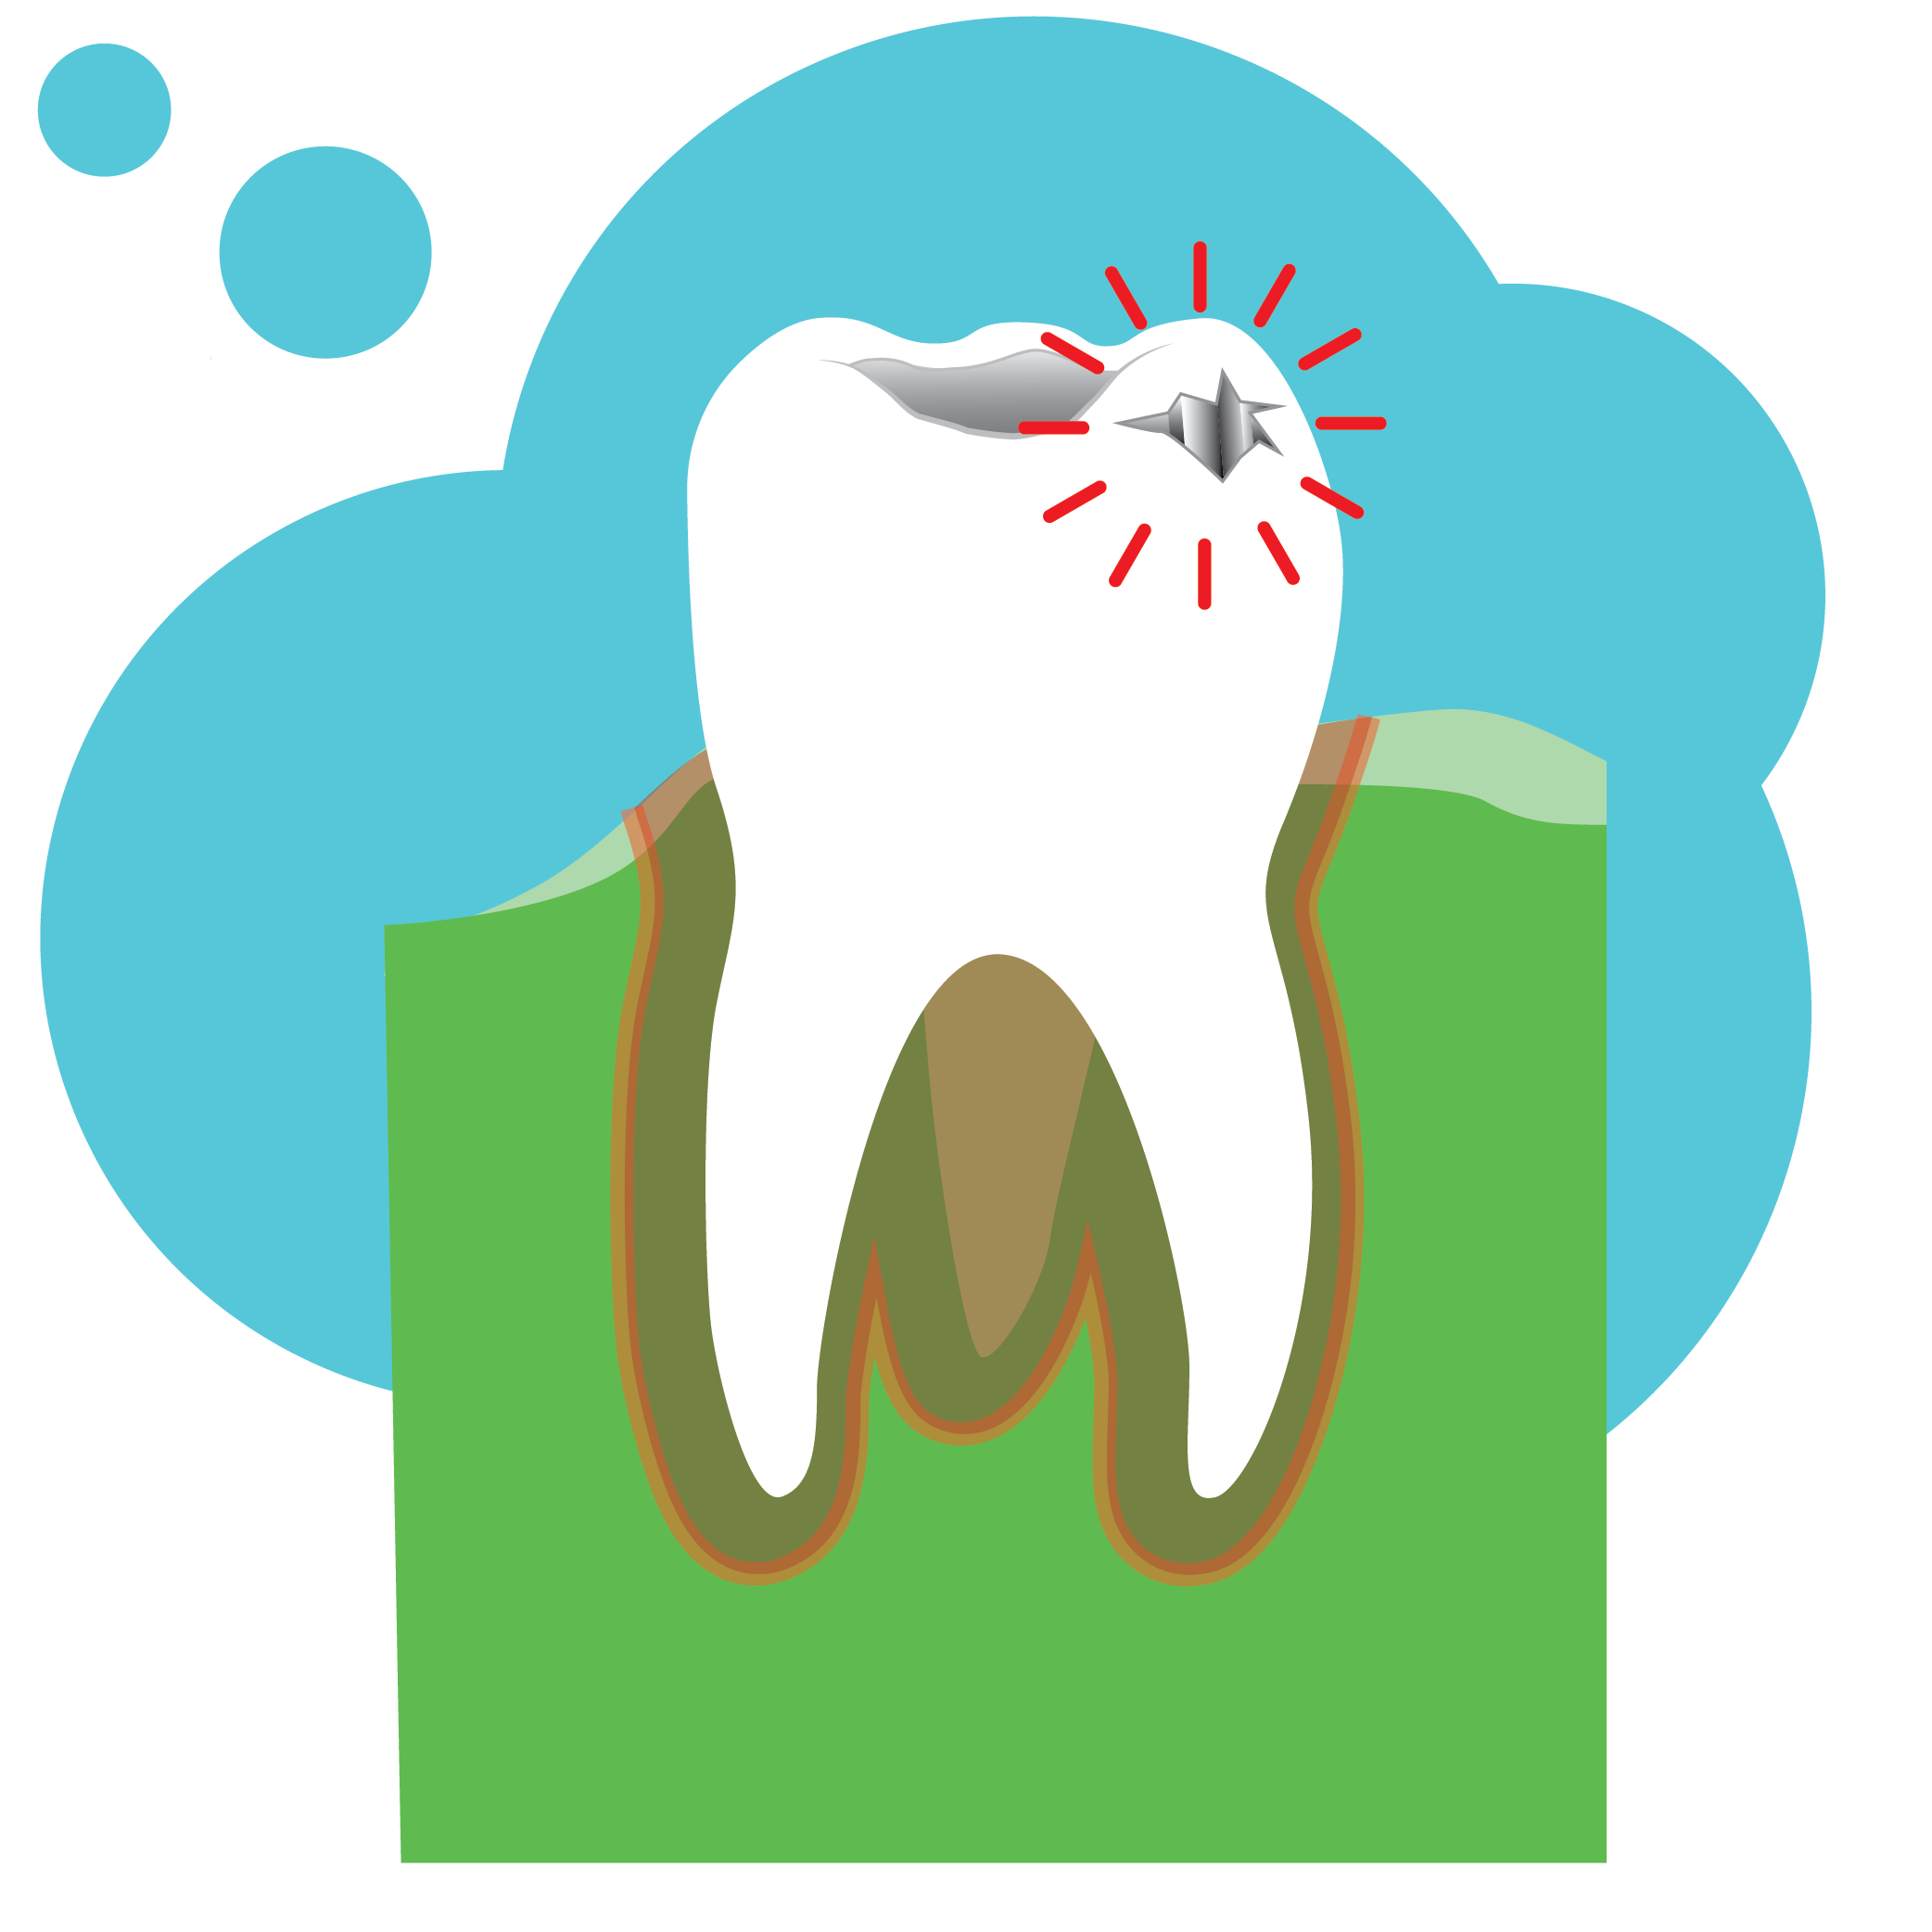 Illustration of tooth with decay/a cavity appearing on top as a gray hole in the tooth